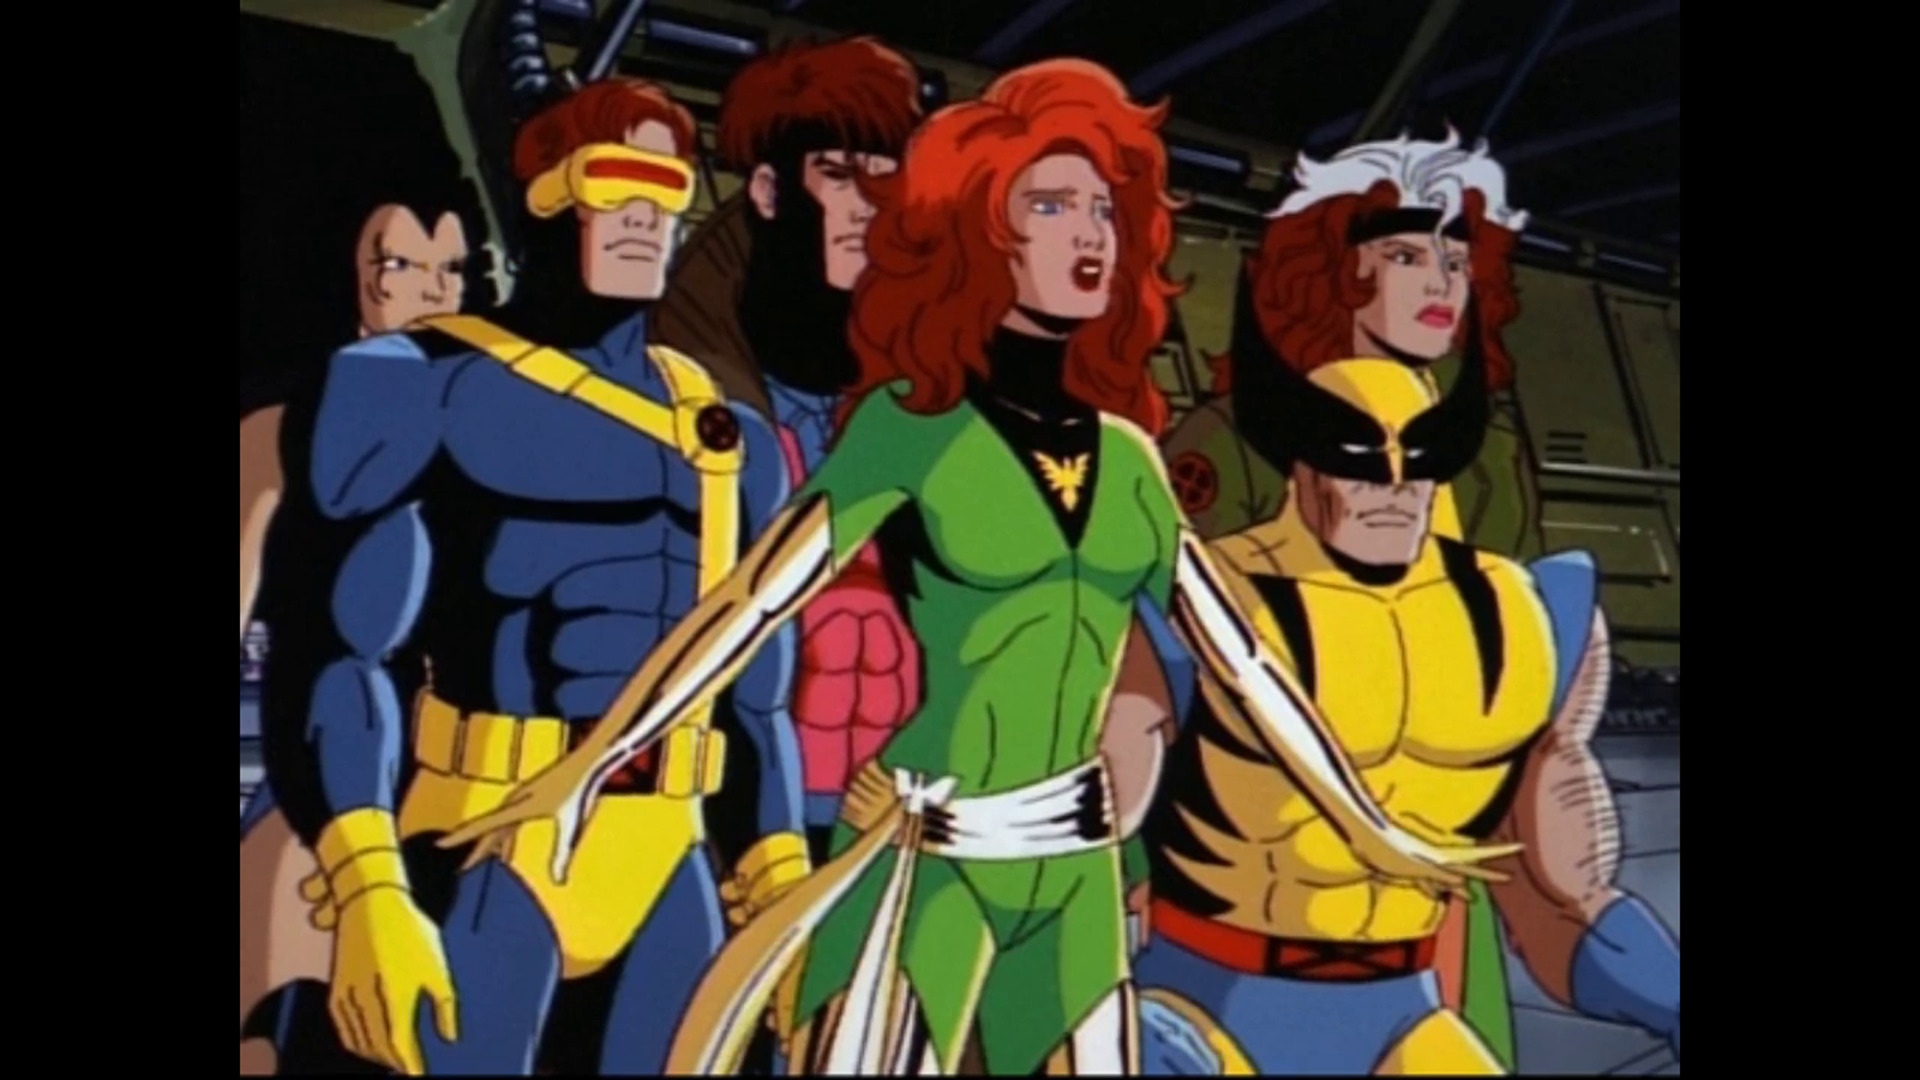 The team stands united against the Shiar in X-Men: The Animated Series Season 3 Episode 6 "The Phoenix Saga Part 4: The Starjammers" (1992), Marvel Entertainment